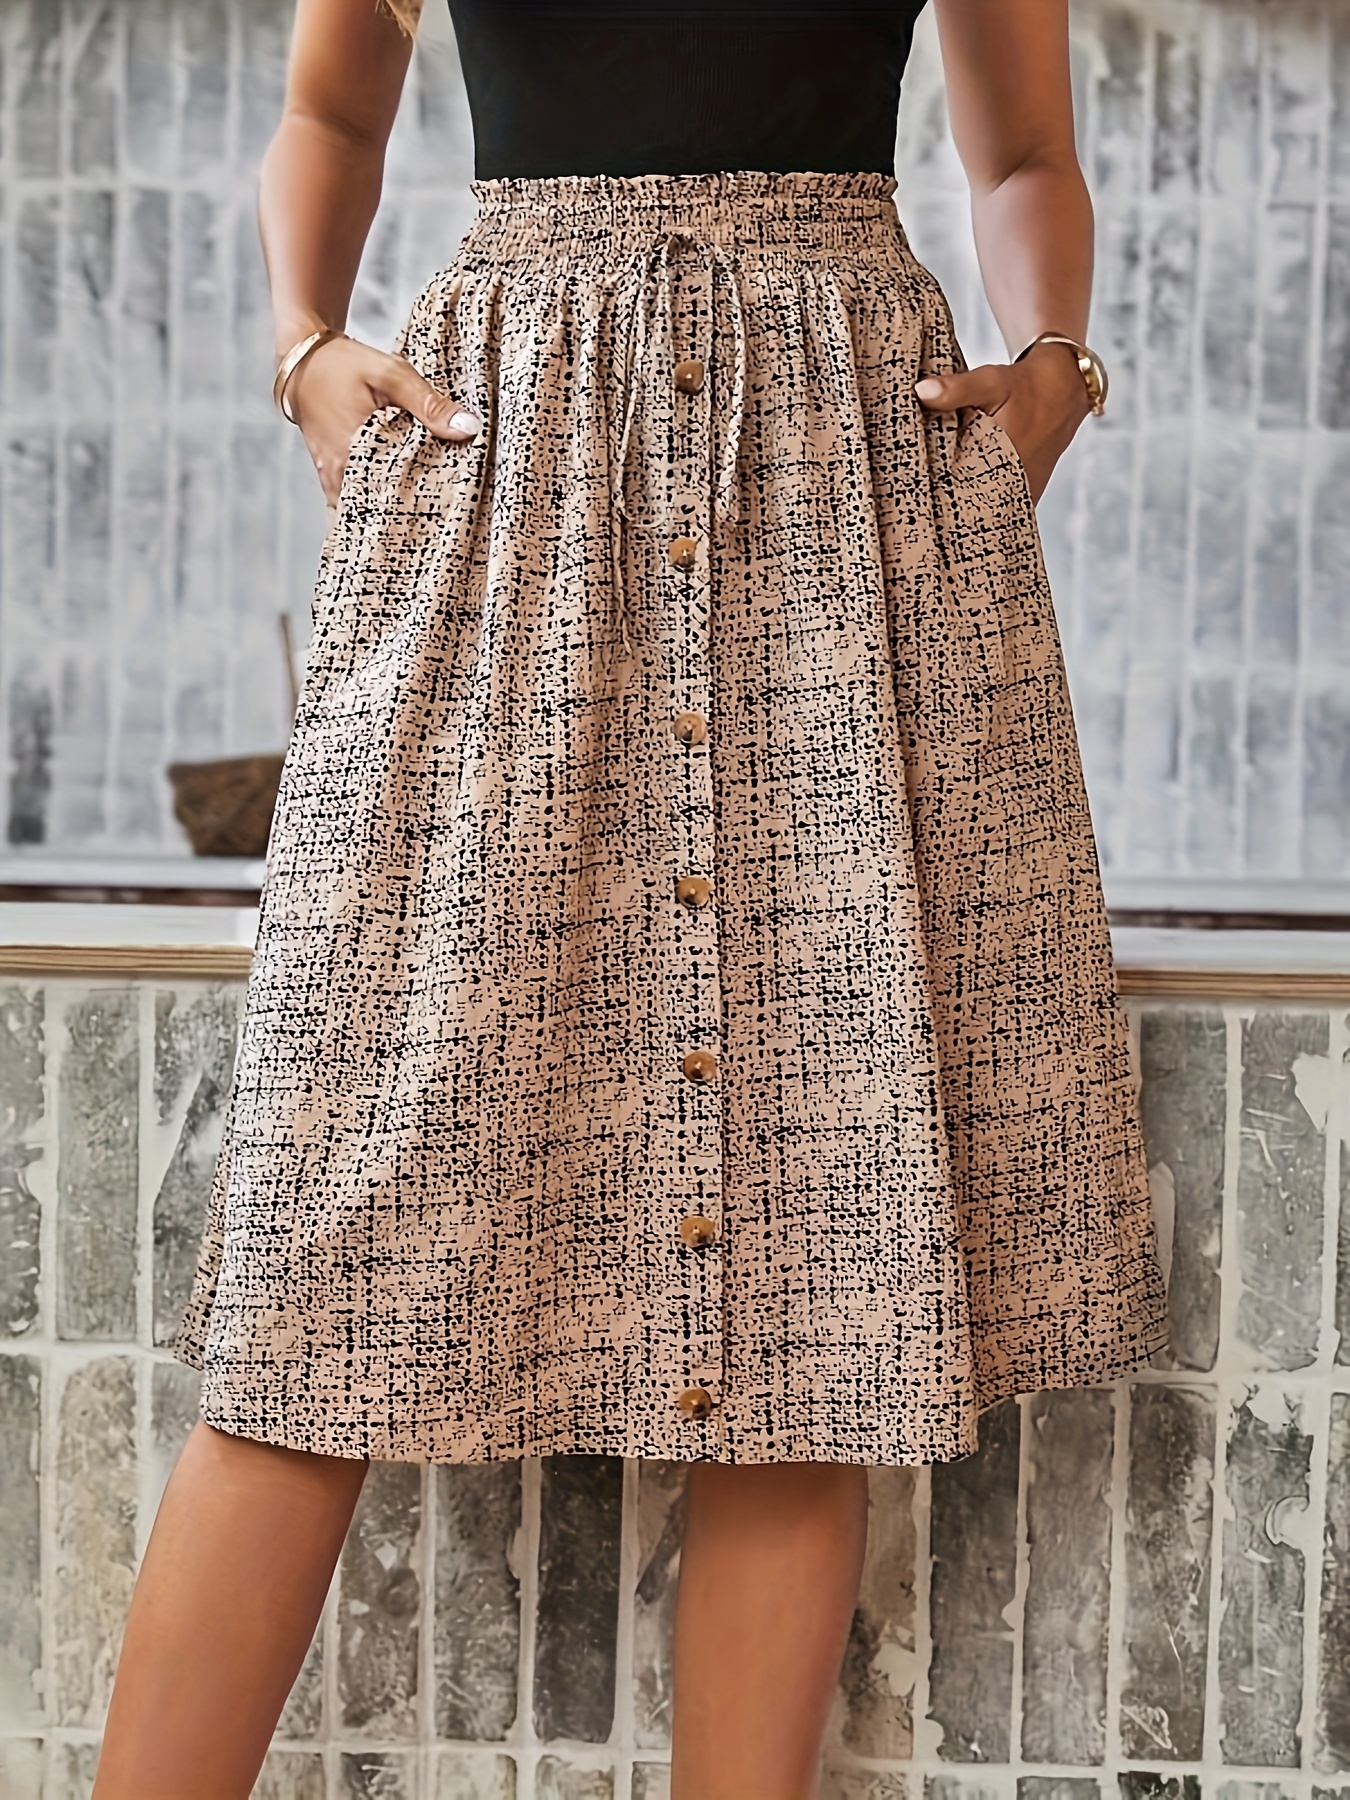 Women's Skirt - Discover online a large selection of Skirts - Fast delivery